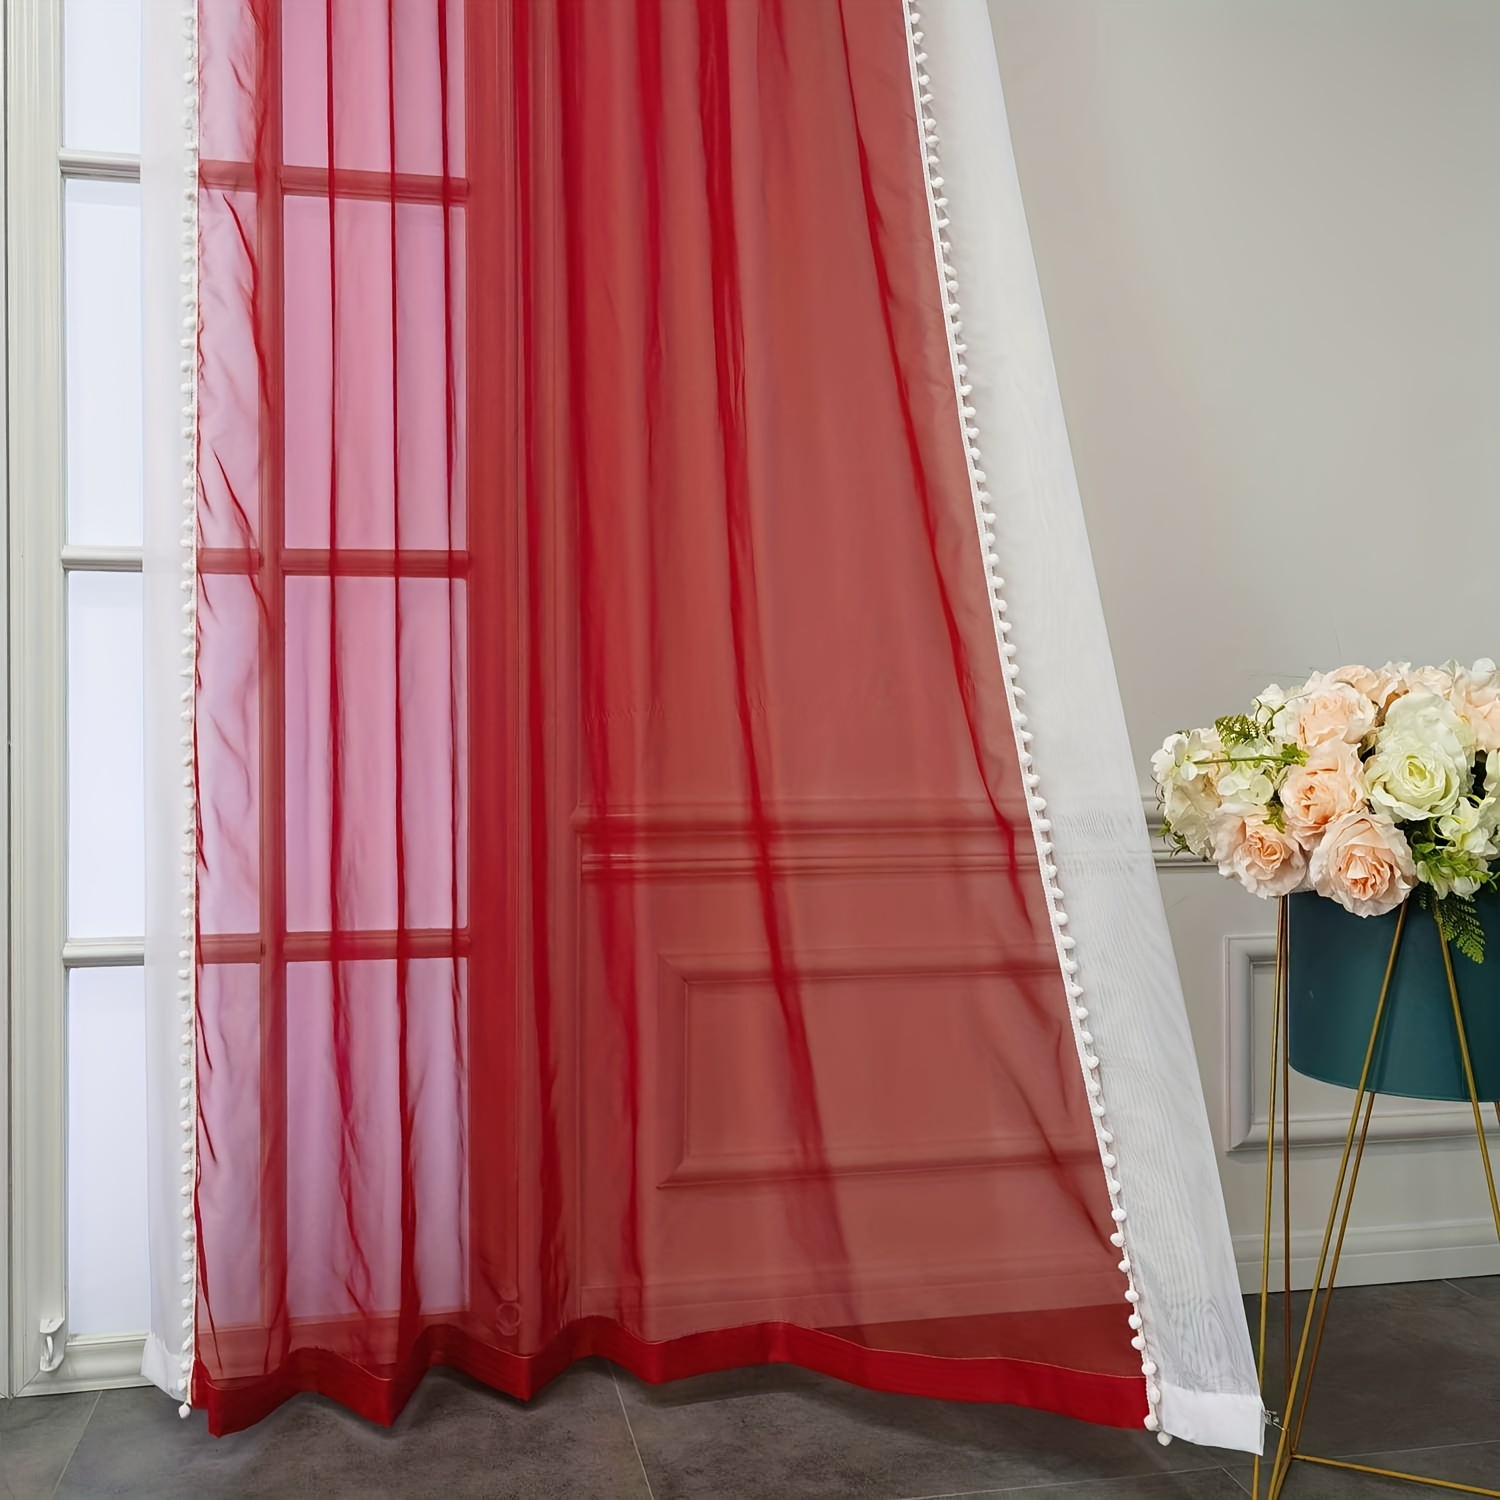 1panel Fashion Sheer Curtain Red White